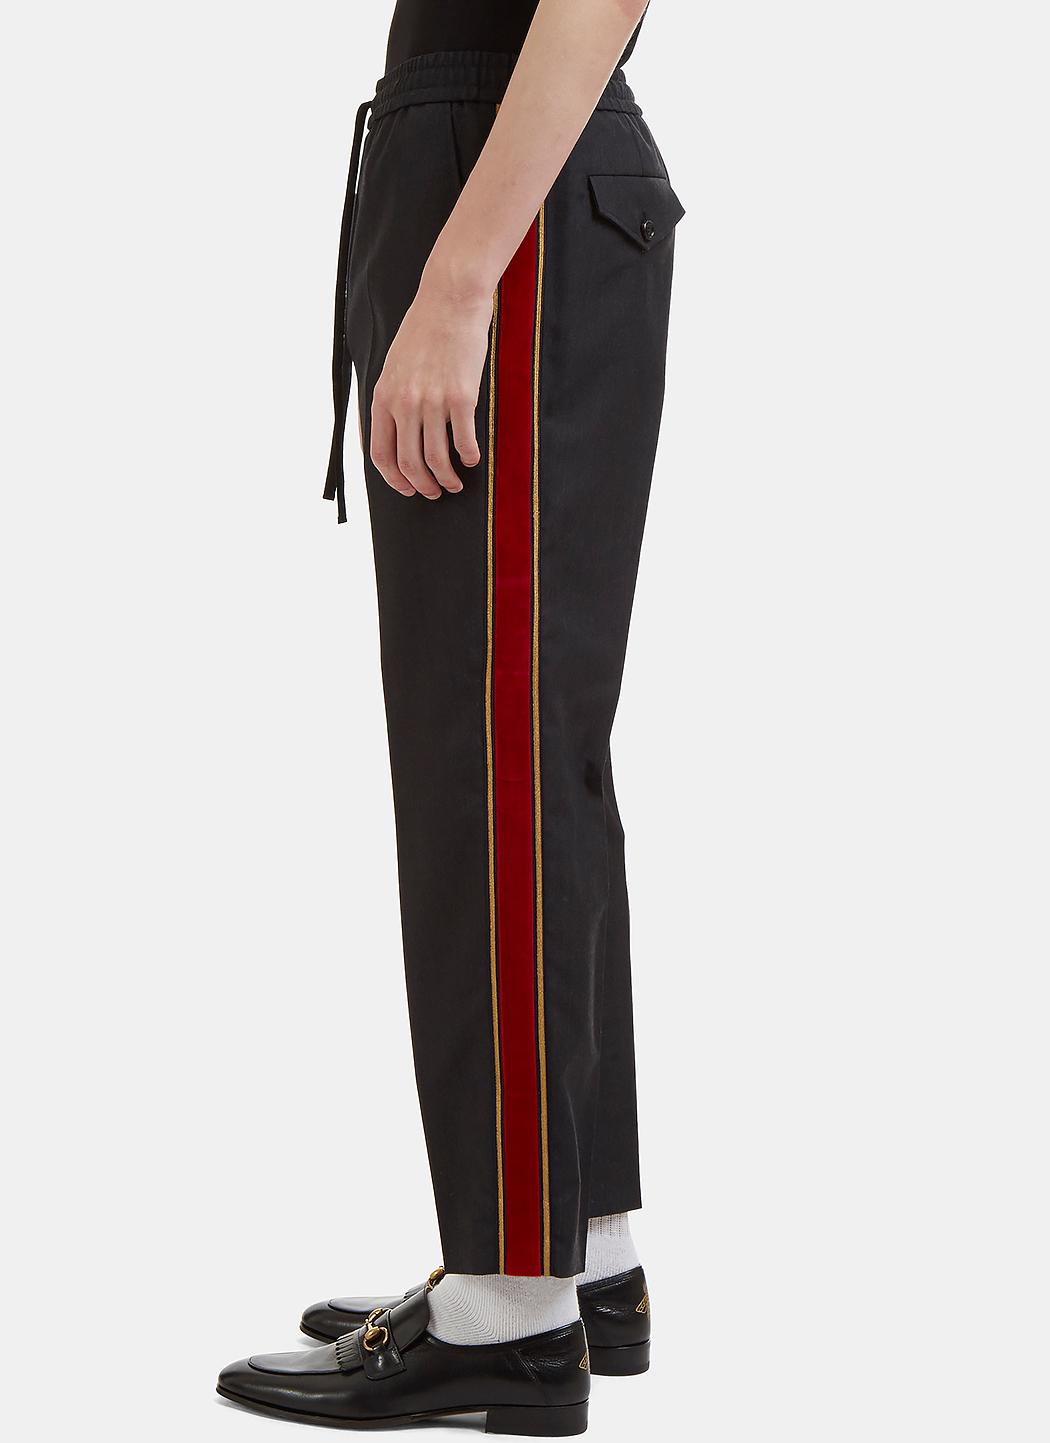 Gucci Cotton Side Stripe Tapered Leg Track Pants In Black for Men - Lyst